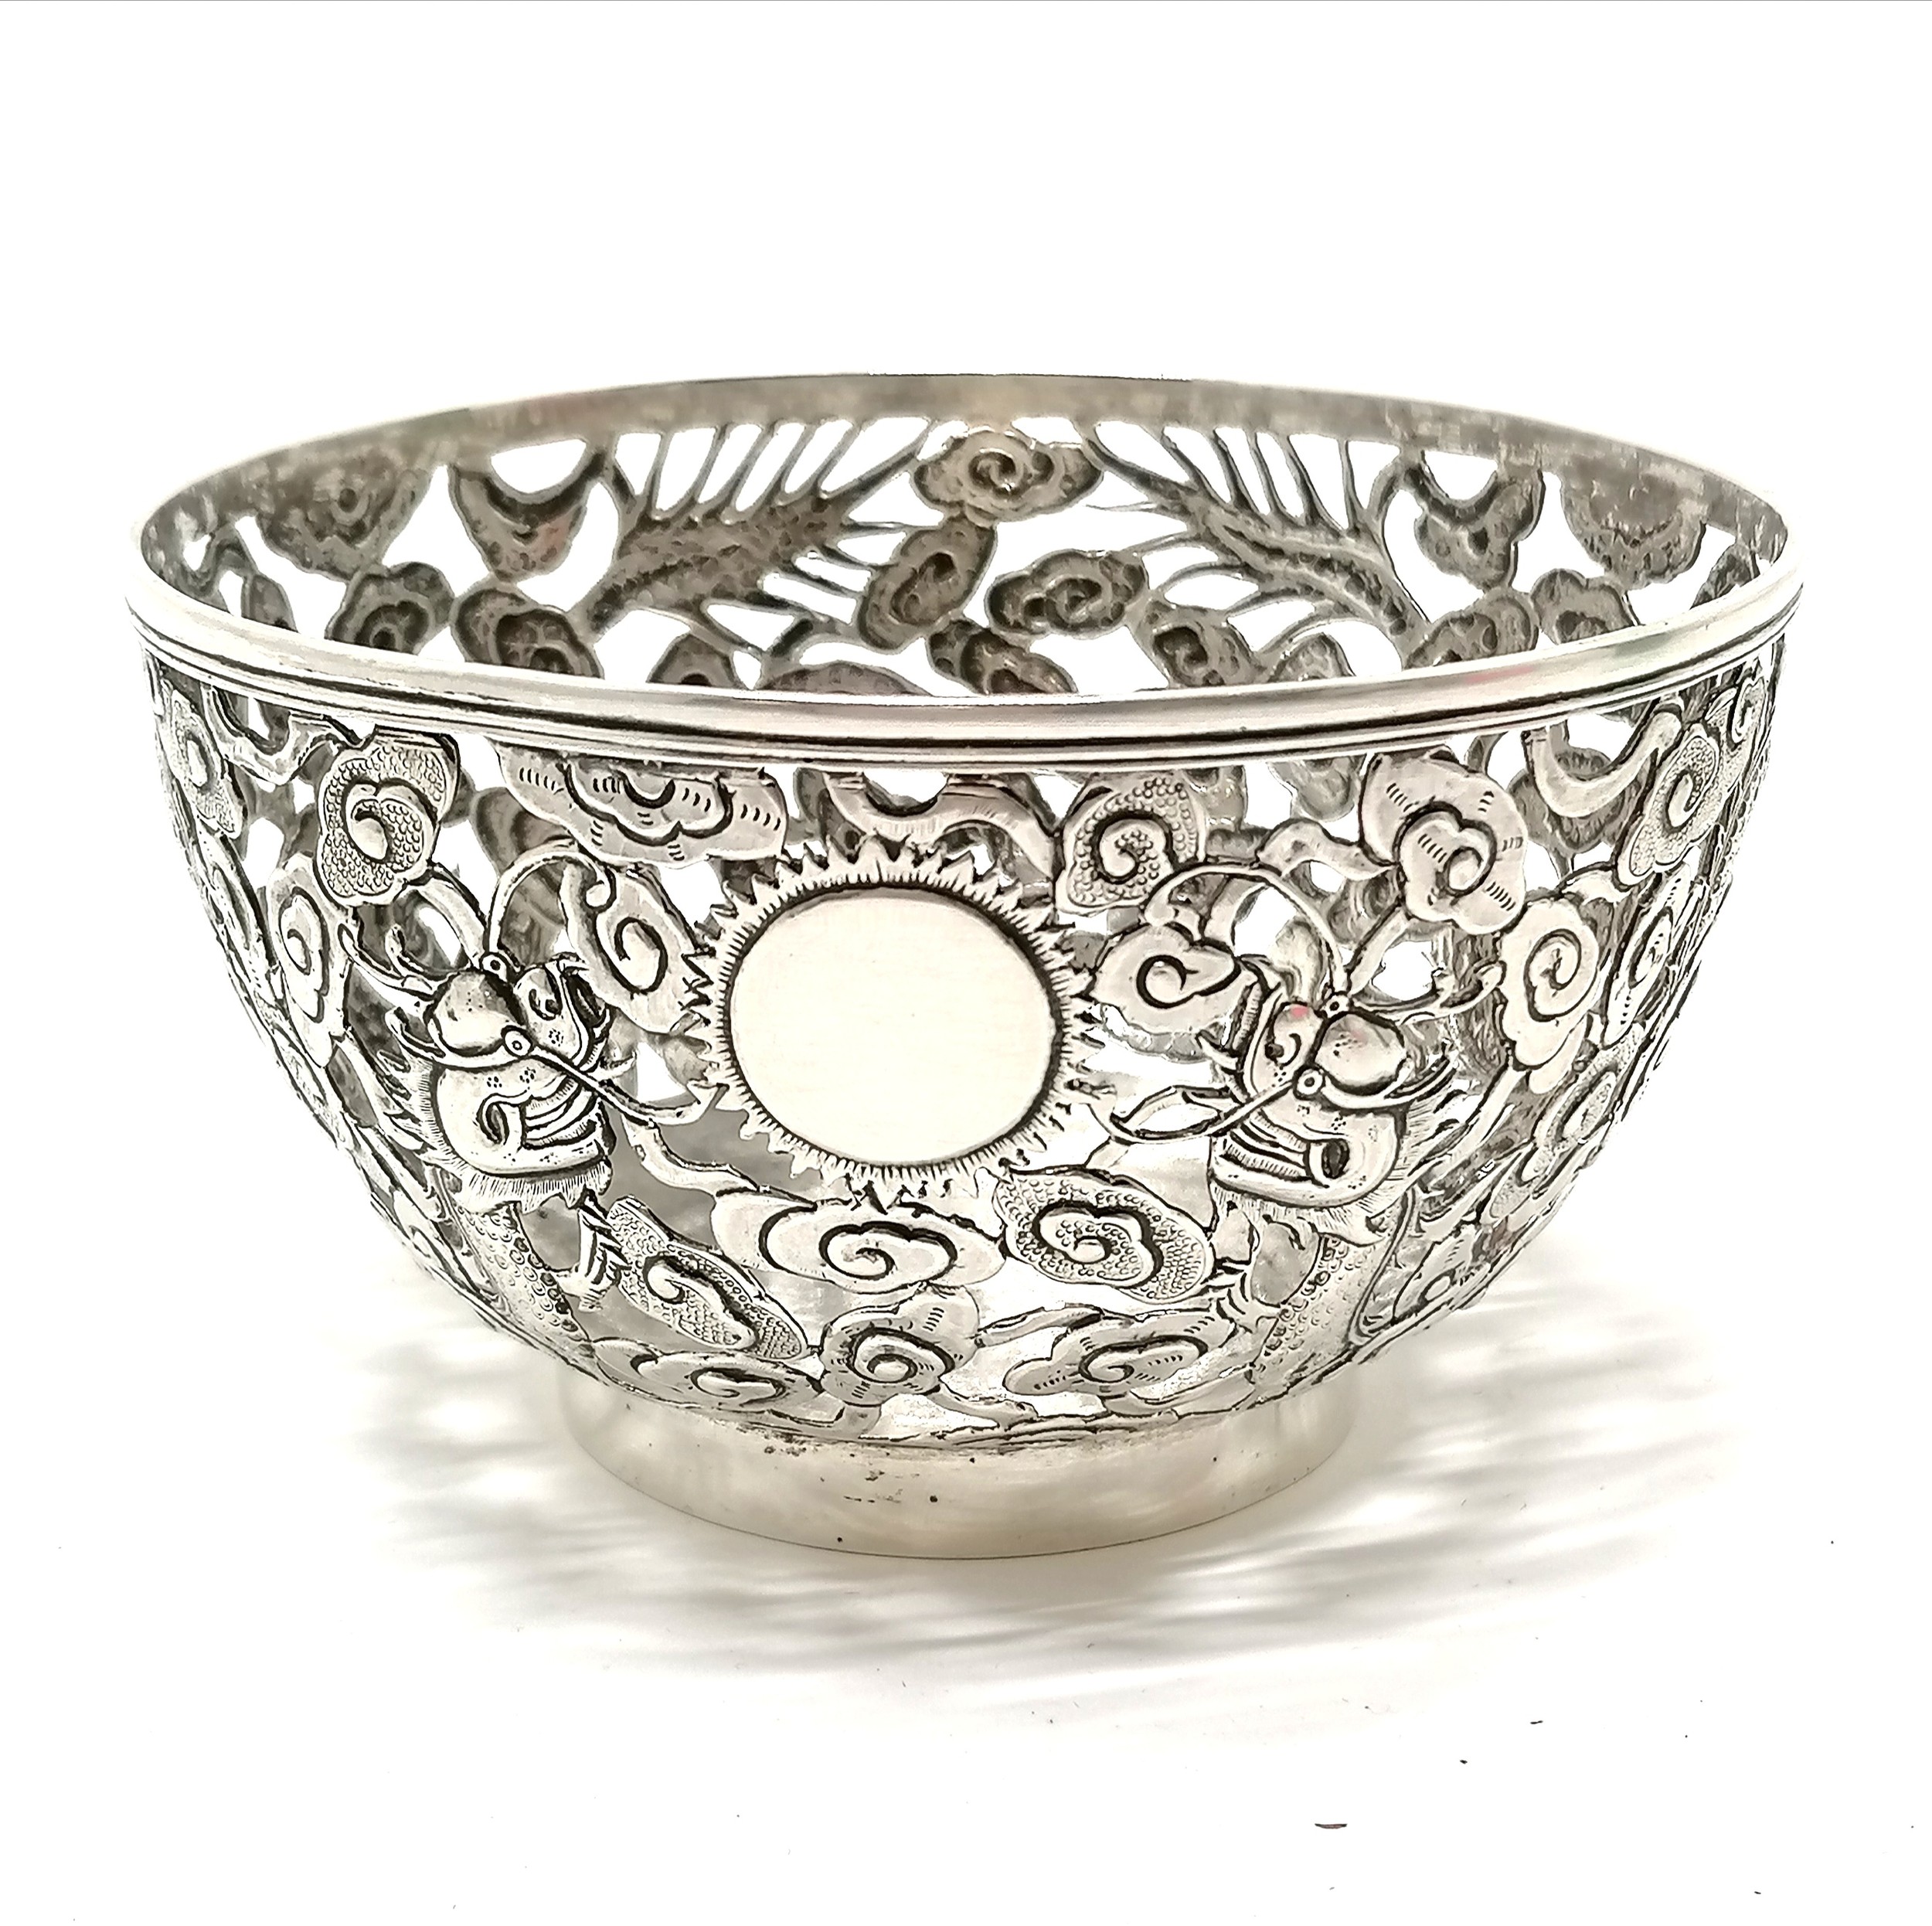 Chinese antique silver bowl with pierced decoration depicting 2 dragons & flaming pearl cartouche by